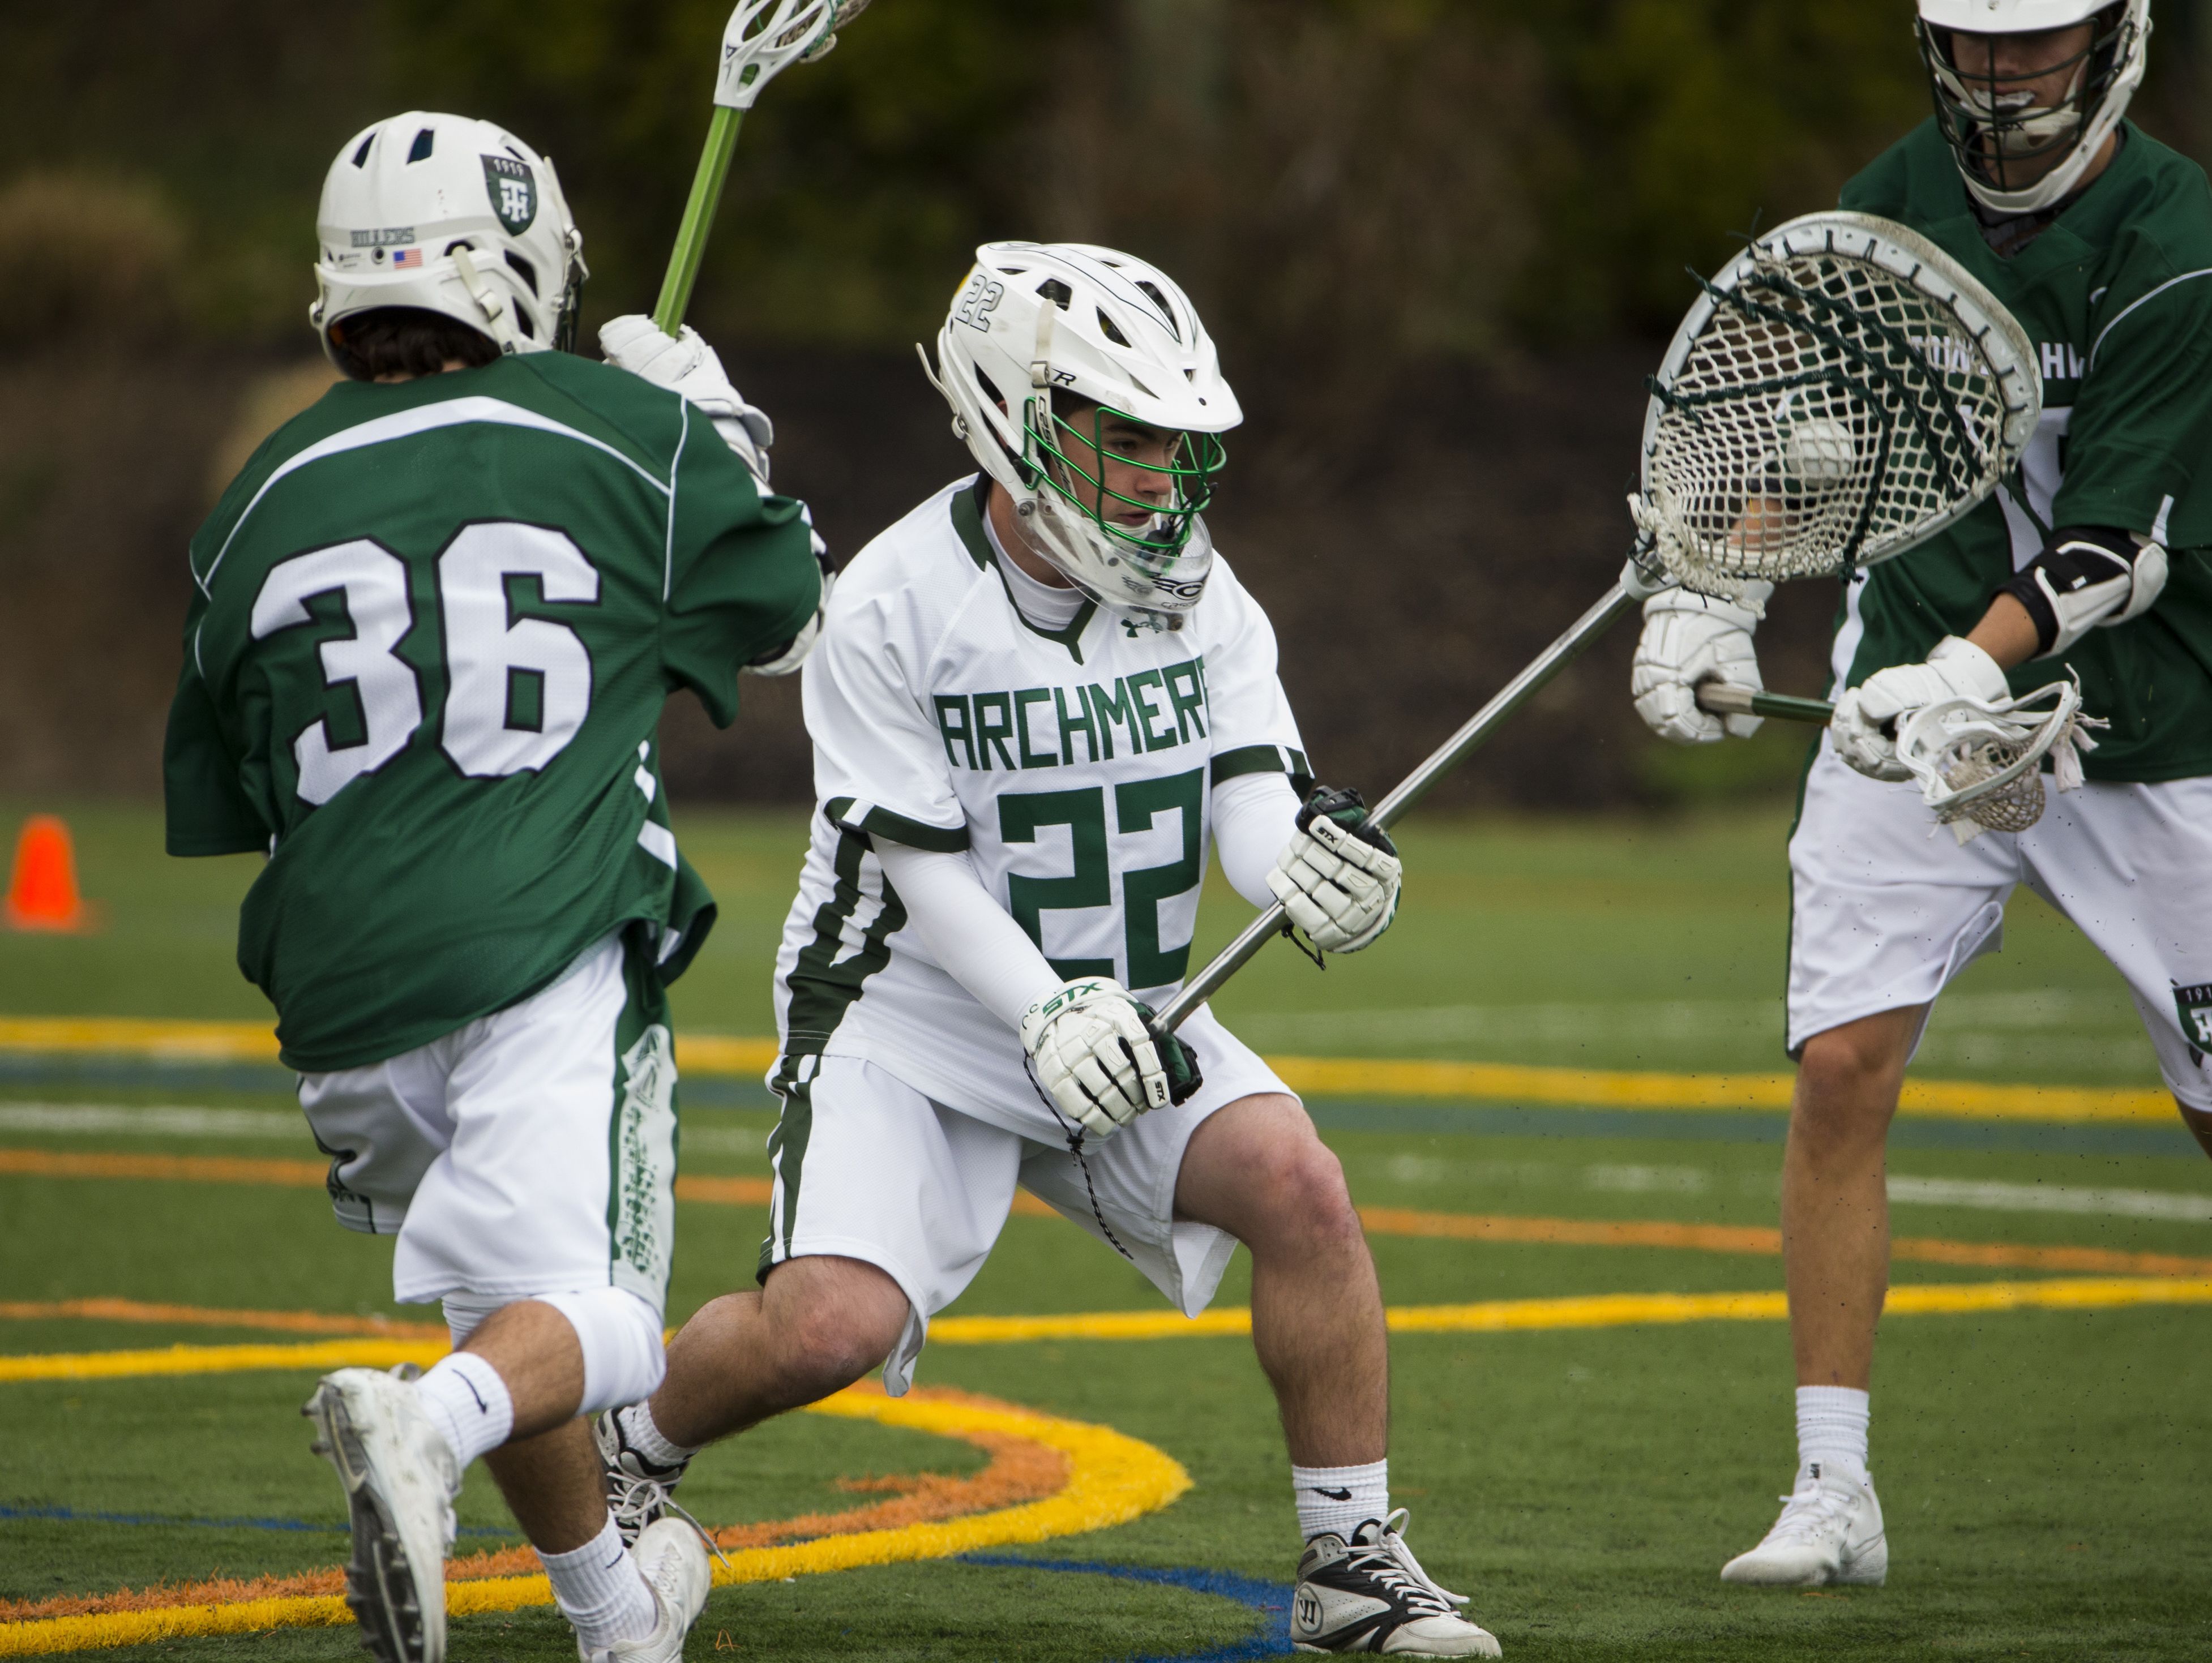 Archmere Connor Smeader goalie steps out of his crease to snag a loose ball in the second half of Archmere's 12-7 win Saturday.